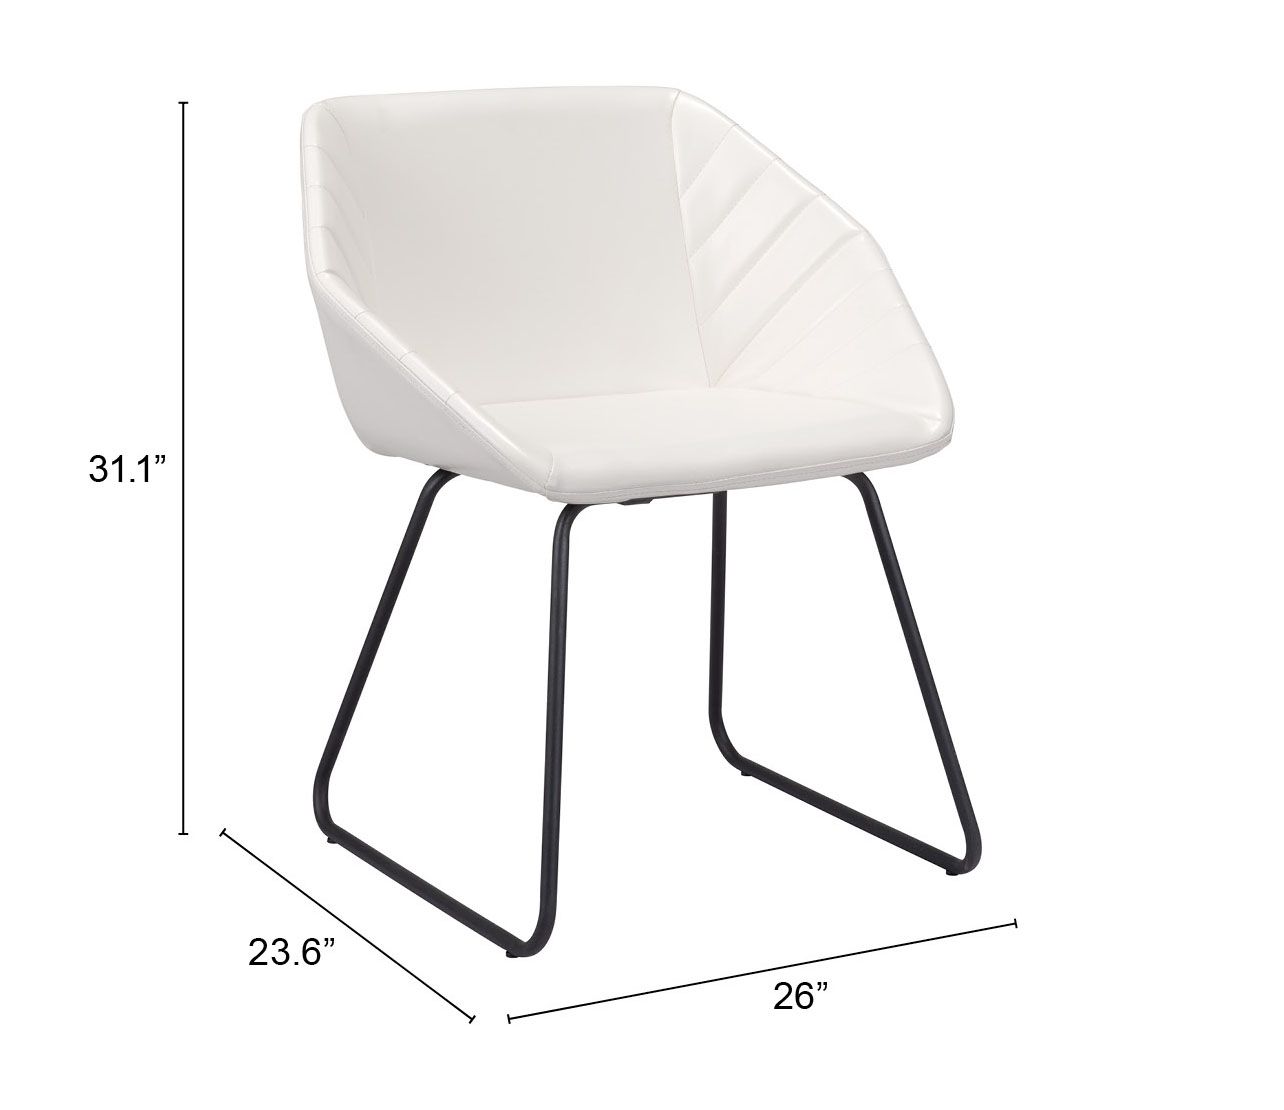 Miguel Dining Chair White